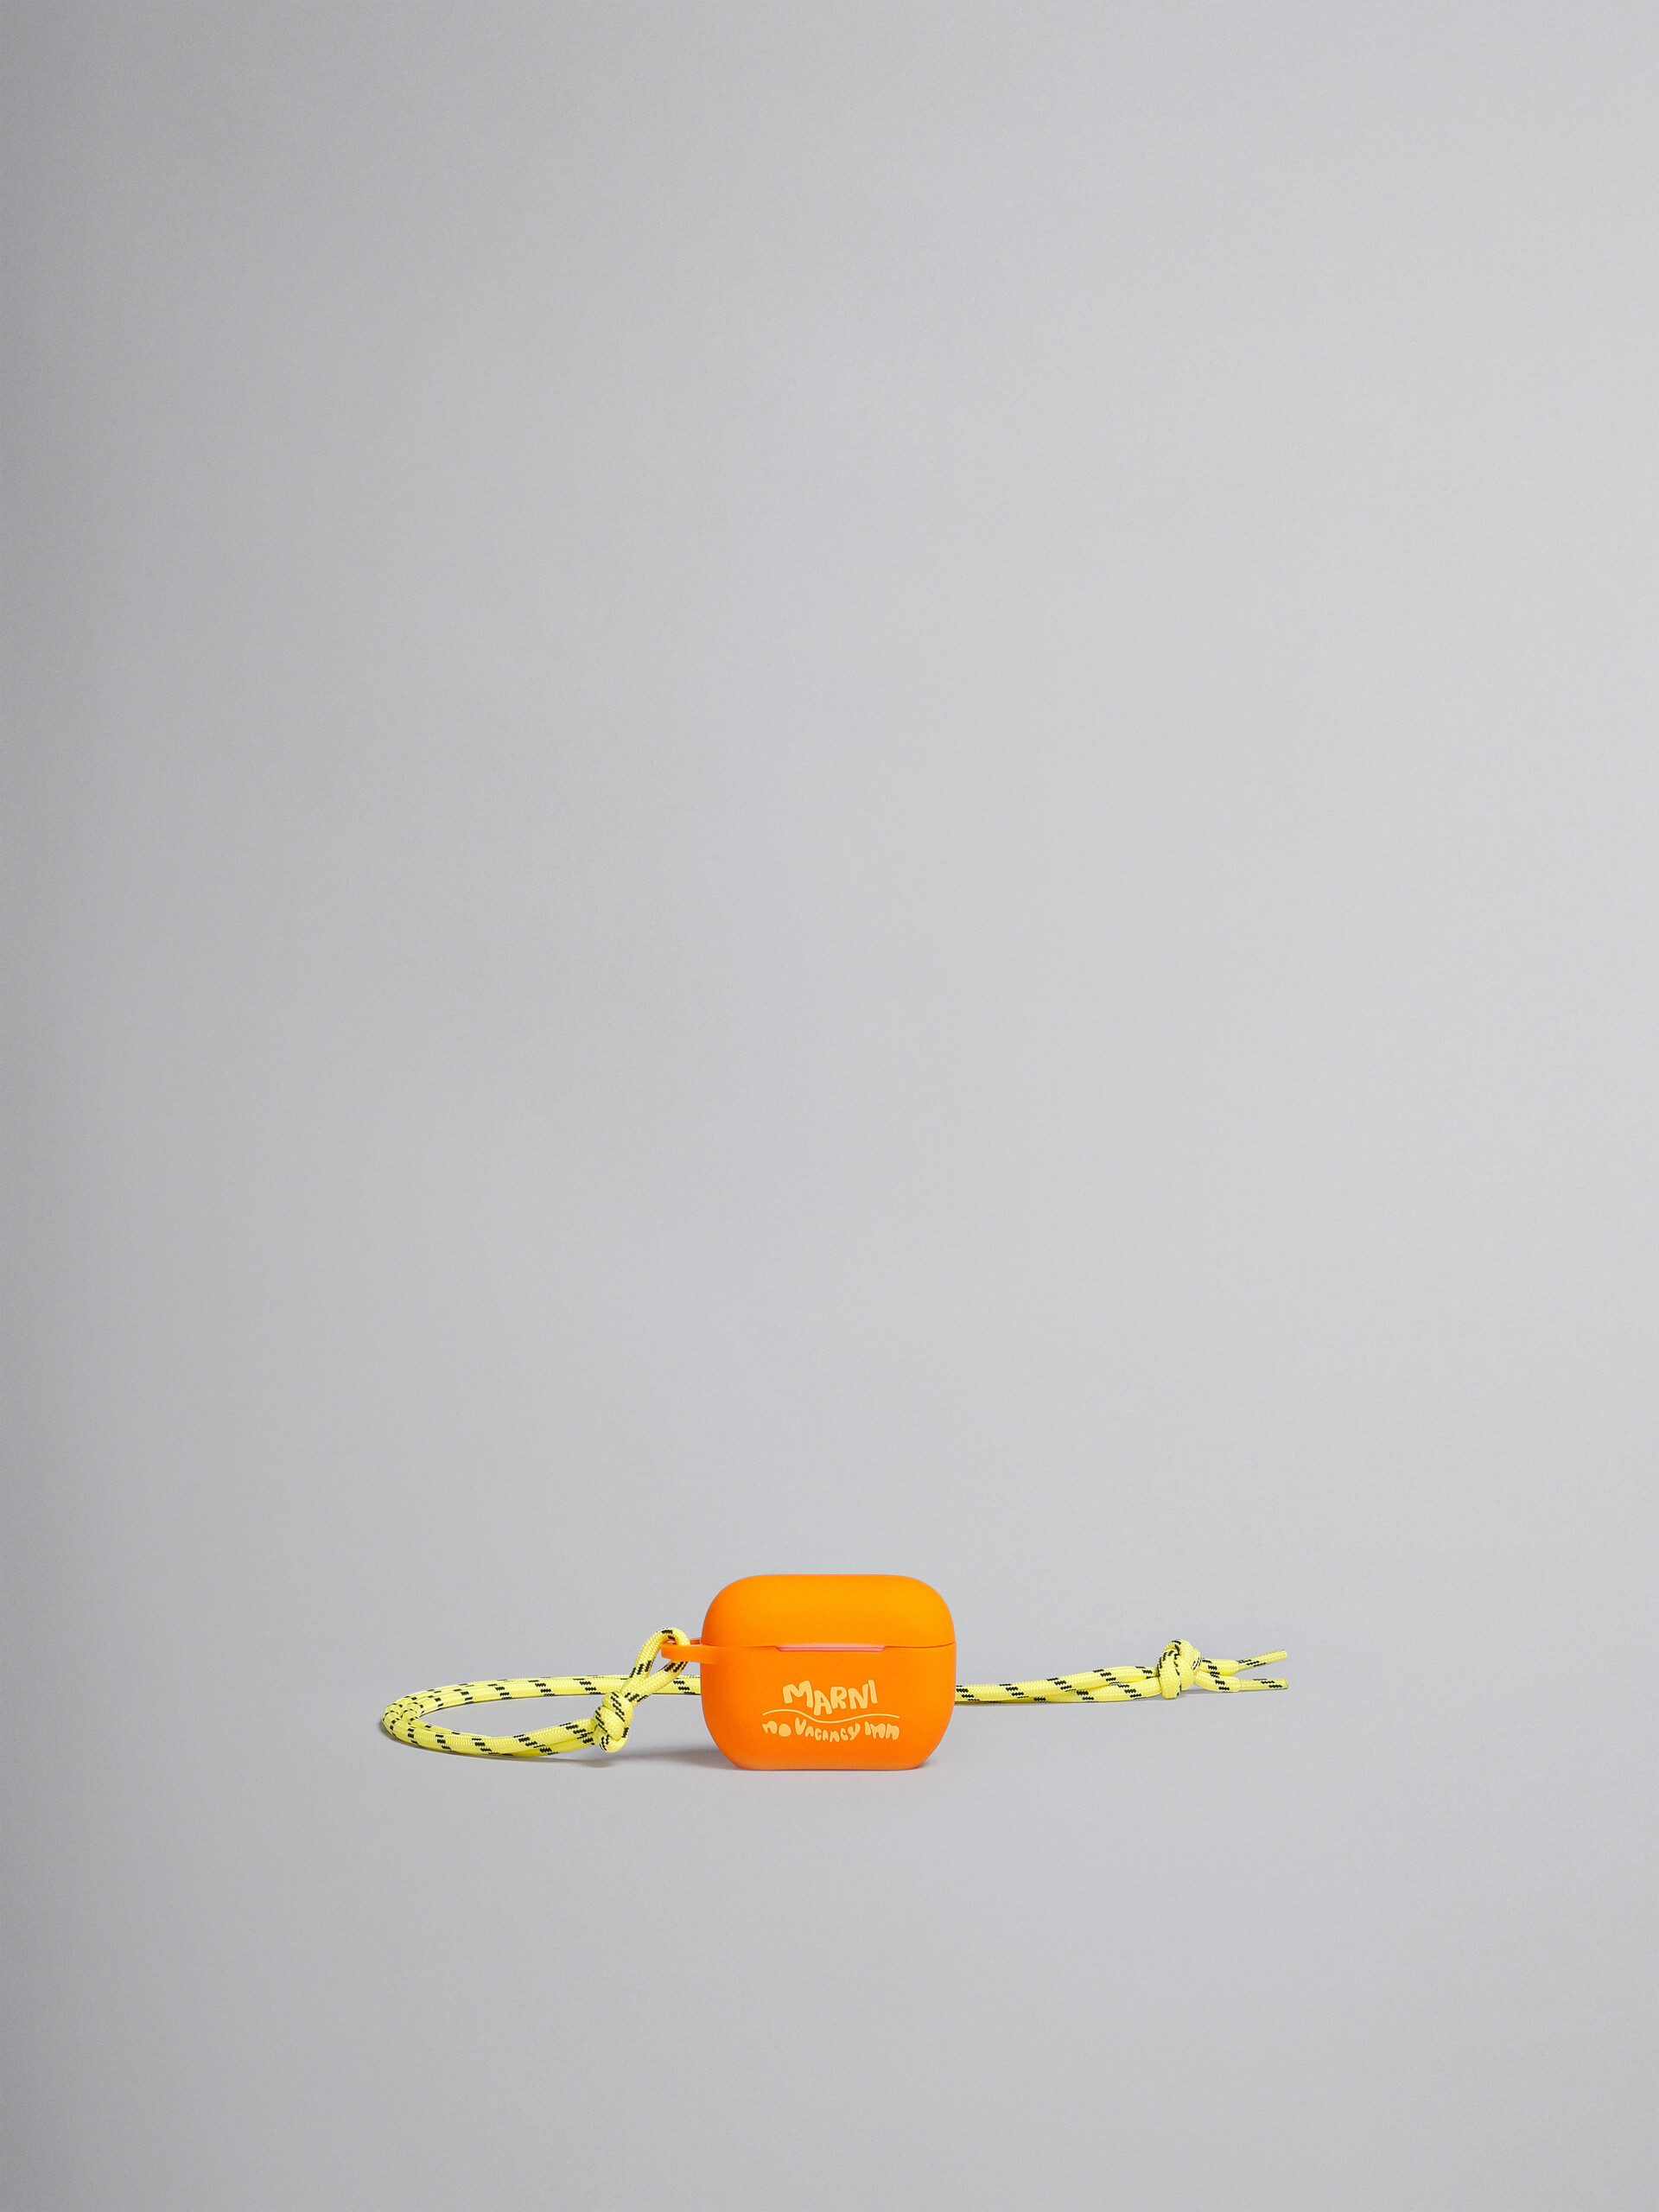 Marni x No Vacancy Inn - Orange and yellow Airpods case - Other accessories - Image 1